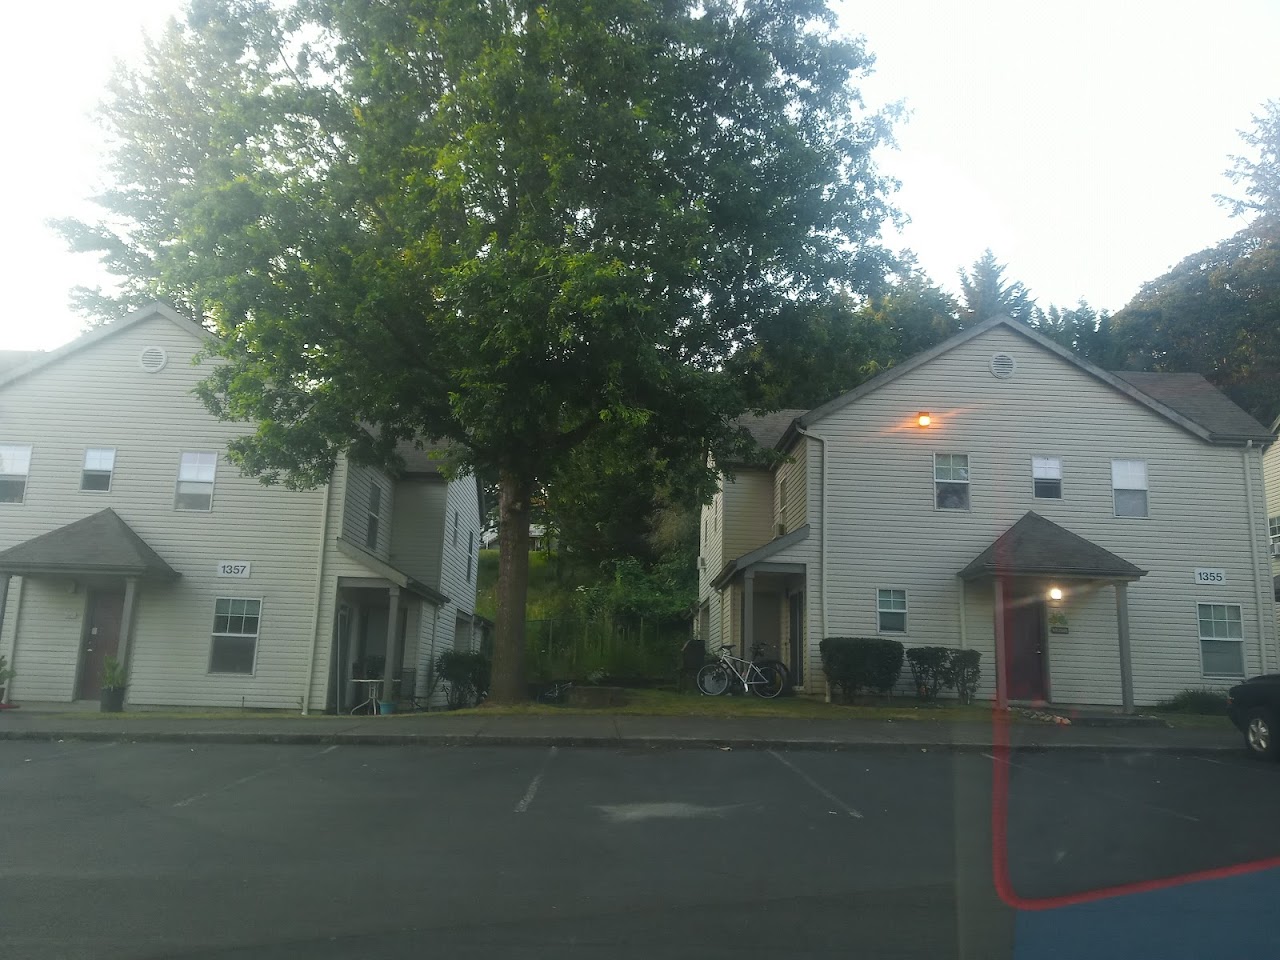 Photo of WOLF RIDGE. Affordable housing located at 1301 E SANTIAM ST STAYTON, OR 97383